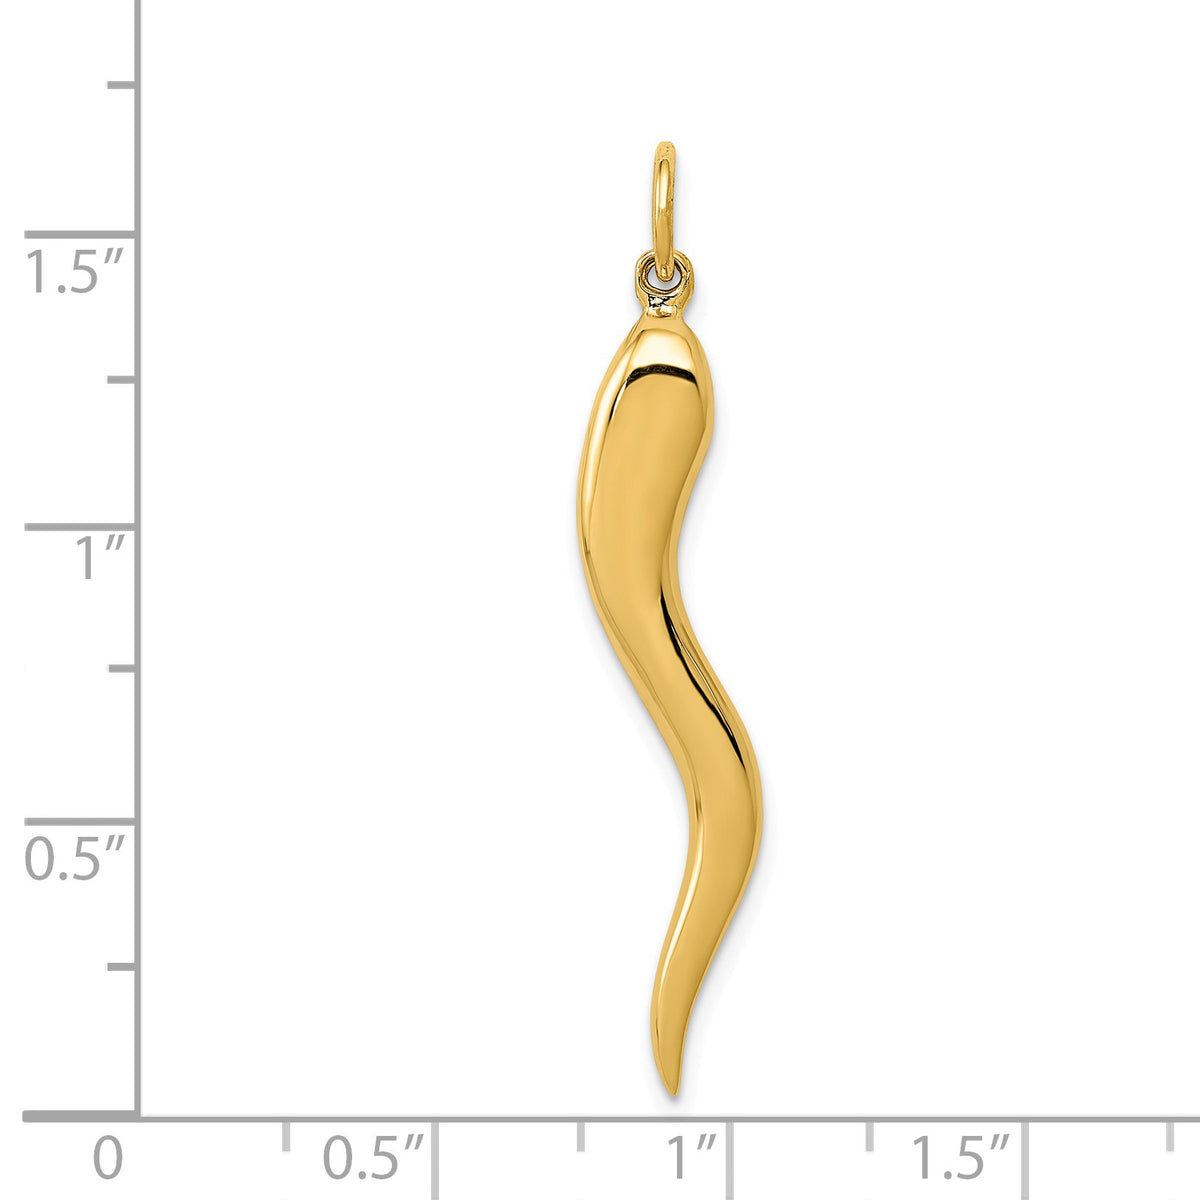 Alternate view of the 14k Yellow Gold Solid Large Italian Horn Pendant, 5 x 40mm by The Black Bow Jewelry Co.